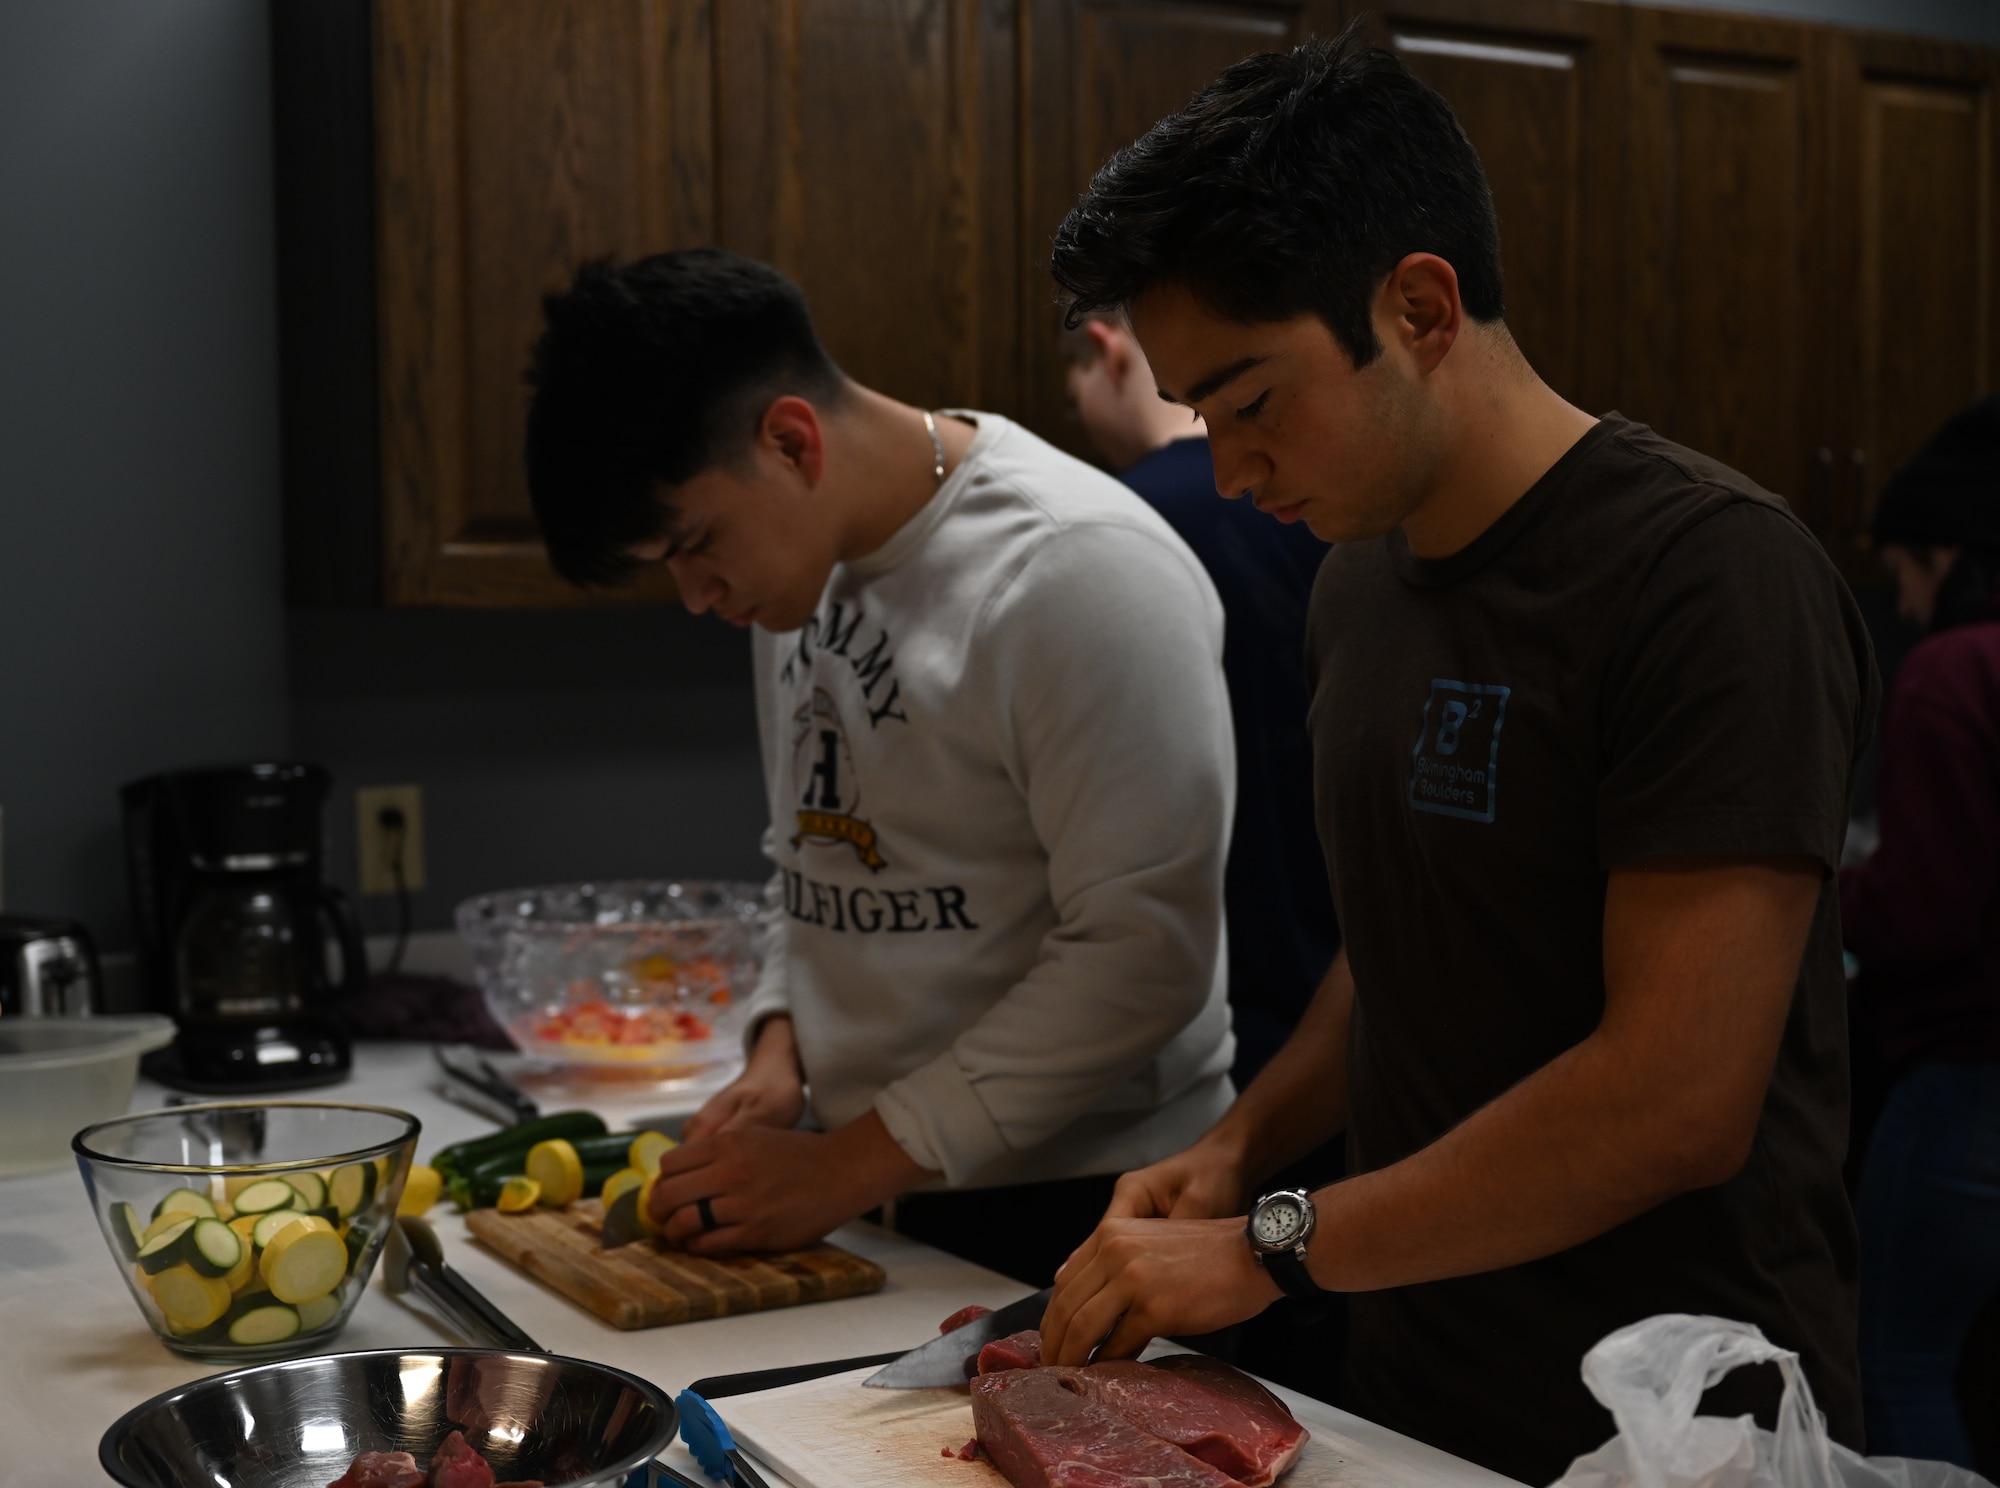 U.S. Air Force Airman 1st Class Miles Painter, 14th Operations Support Squadron (OSS) Aerospace Physiology technician and Airman Diego Valadez, 14th OSS Aircrew Flight Equipment technician, cut food to be used on kabobs, during a cooking class, Nov. 5, 2021, on Columbus Air Force Base, Miss. The base does not have a dining facility so it is important that Airmen learn how to safely and efficiently prepare their own meals. (U.S. Air Force photo by Airman 1st Class Jessica Haynie)